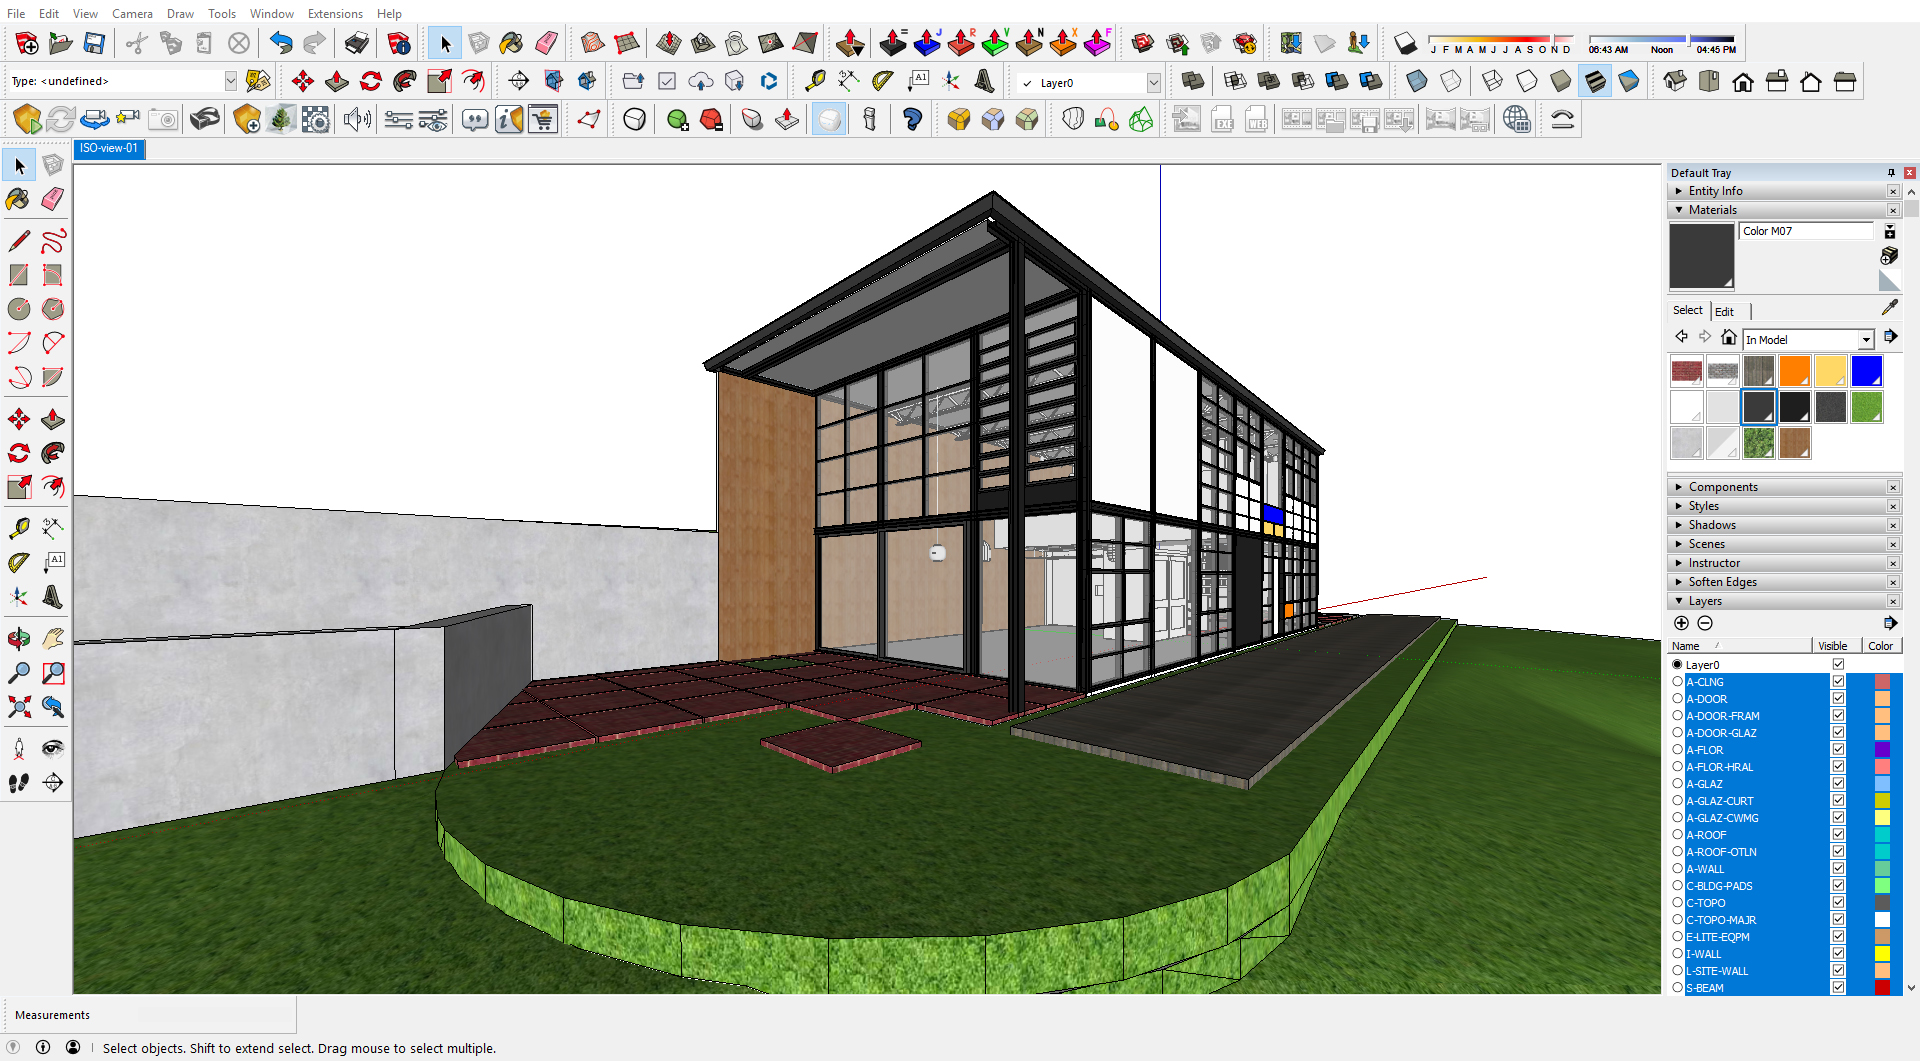 It demonstrates the result of applying materials and set an exterior view for rendering.